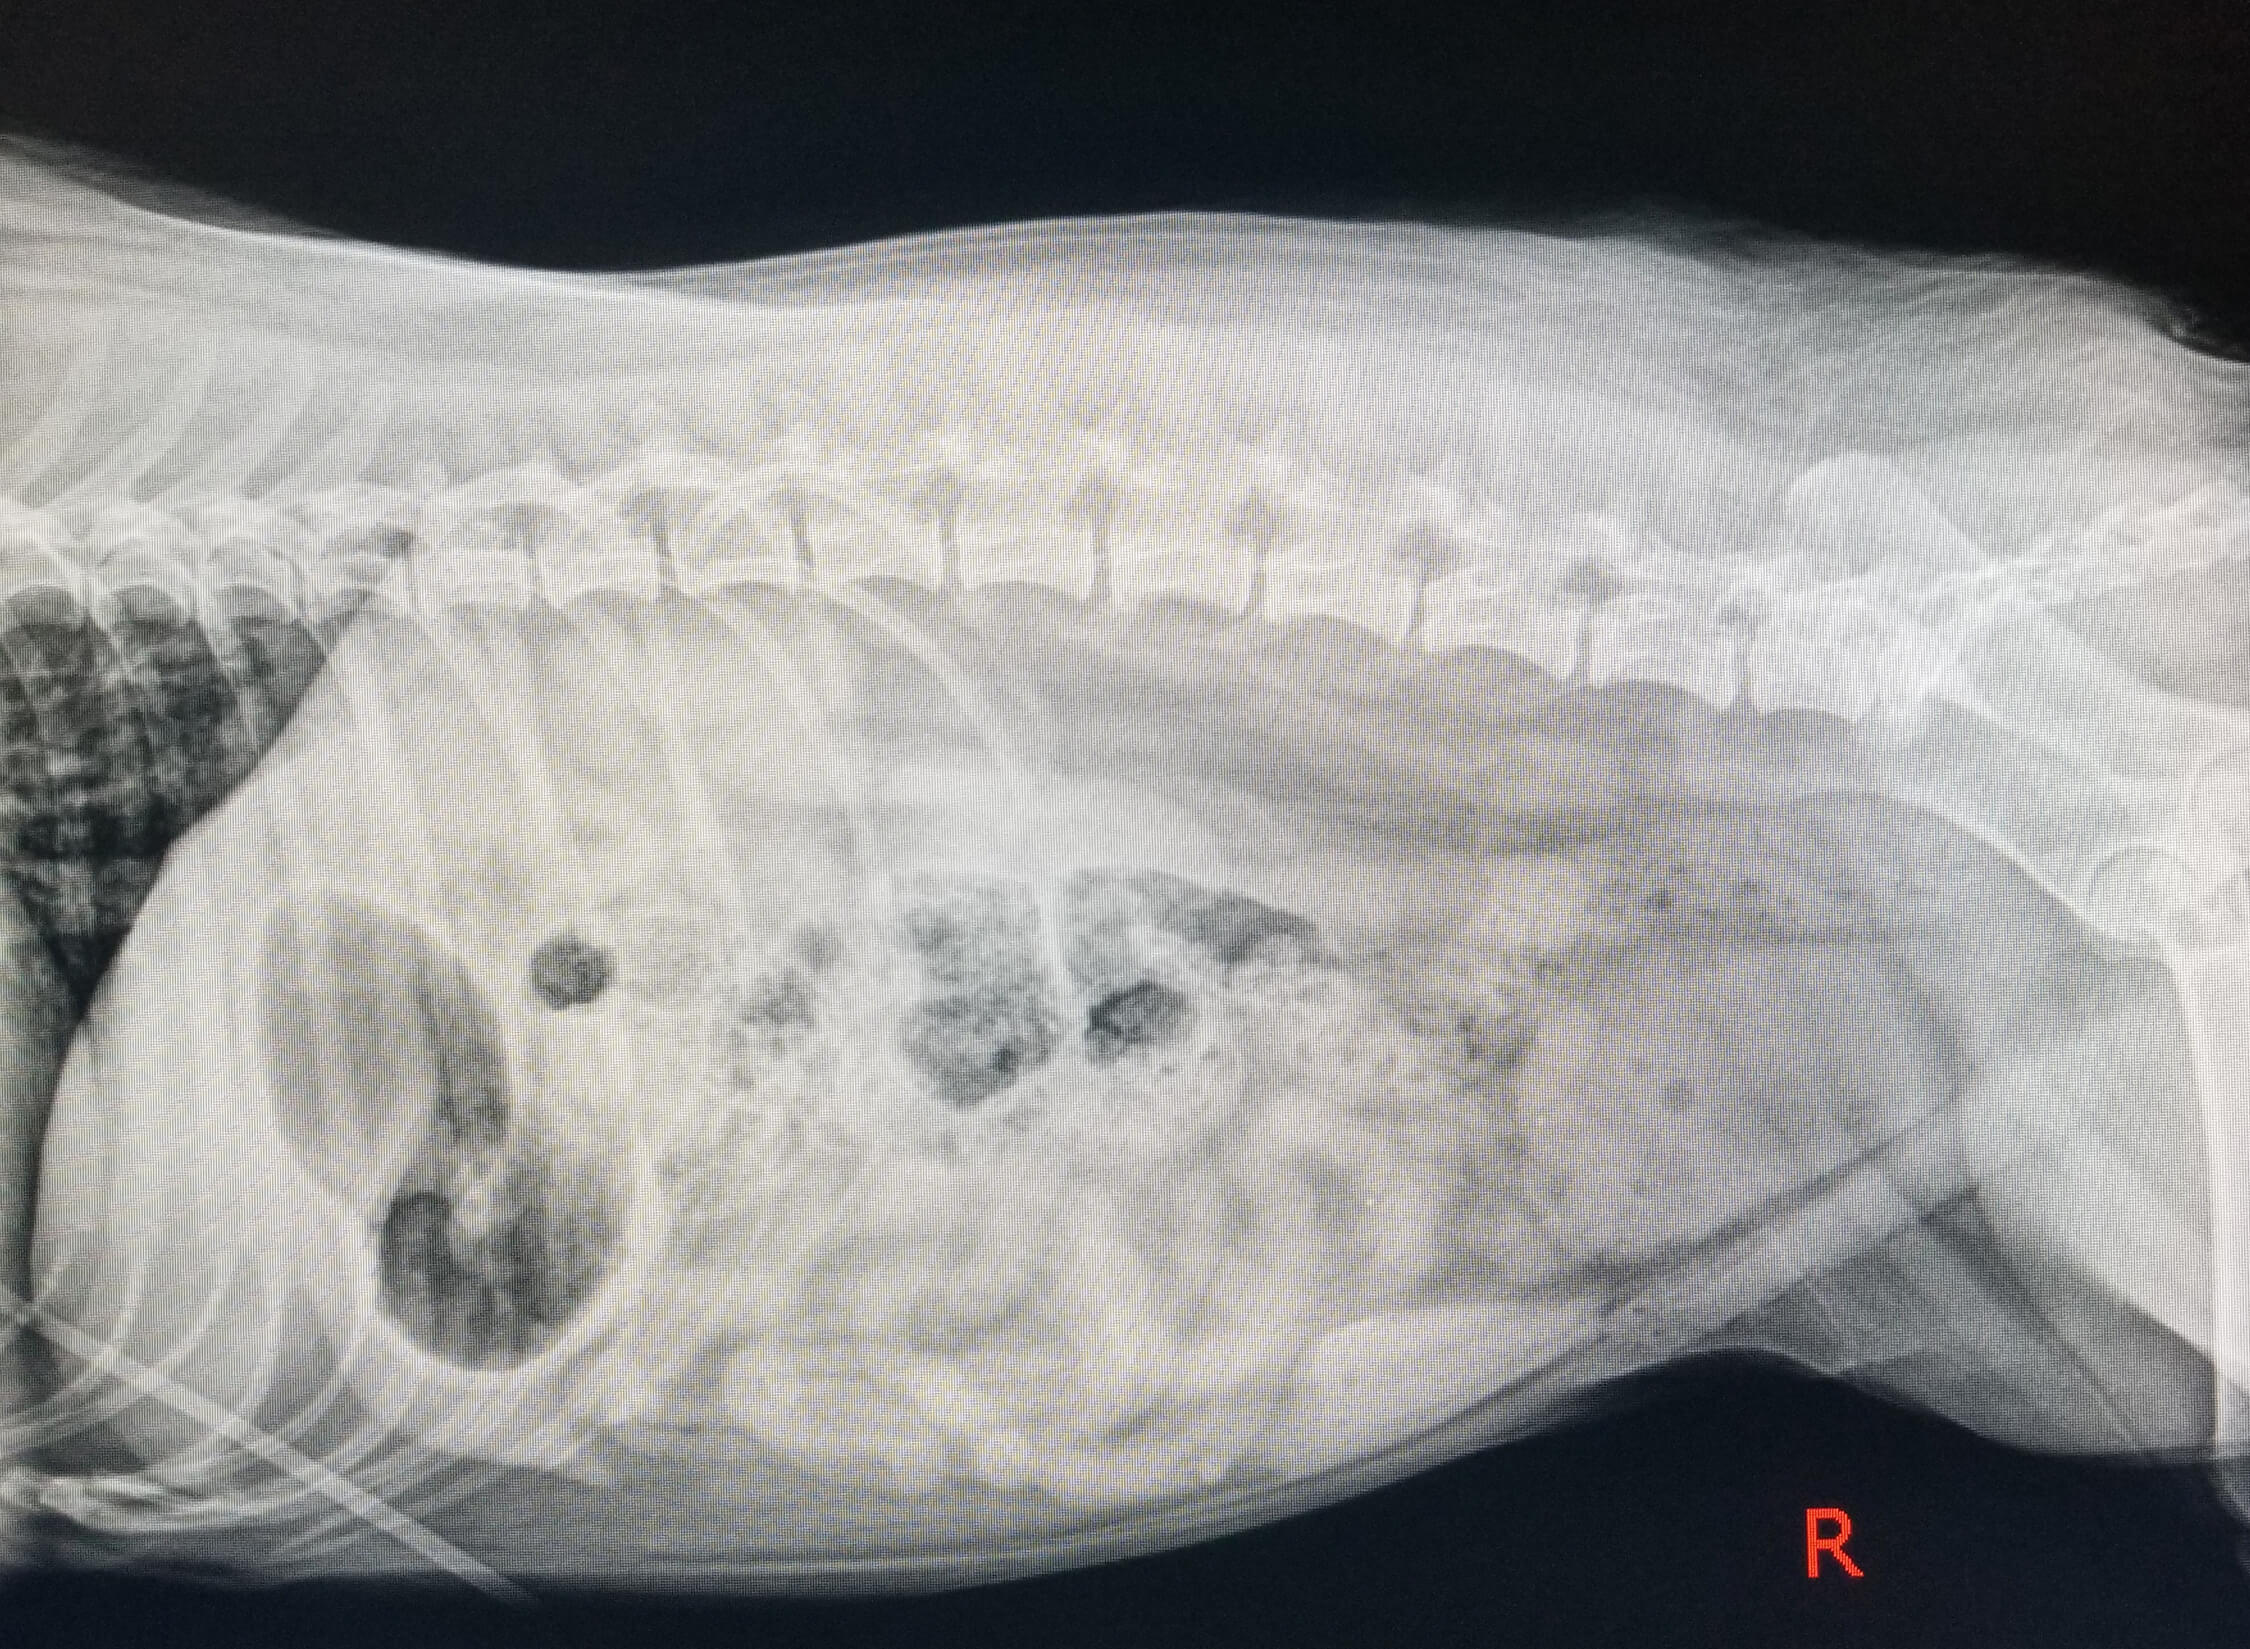 post-operative x-ray showing no remaining bladder stones